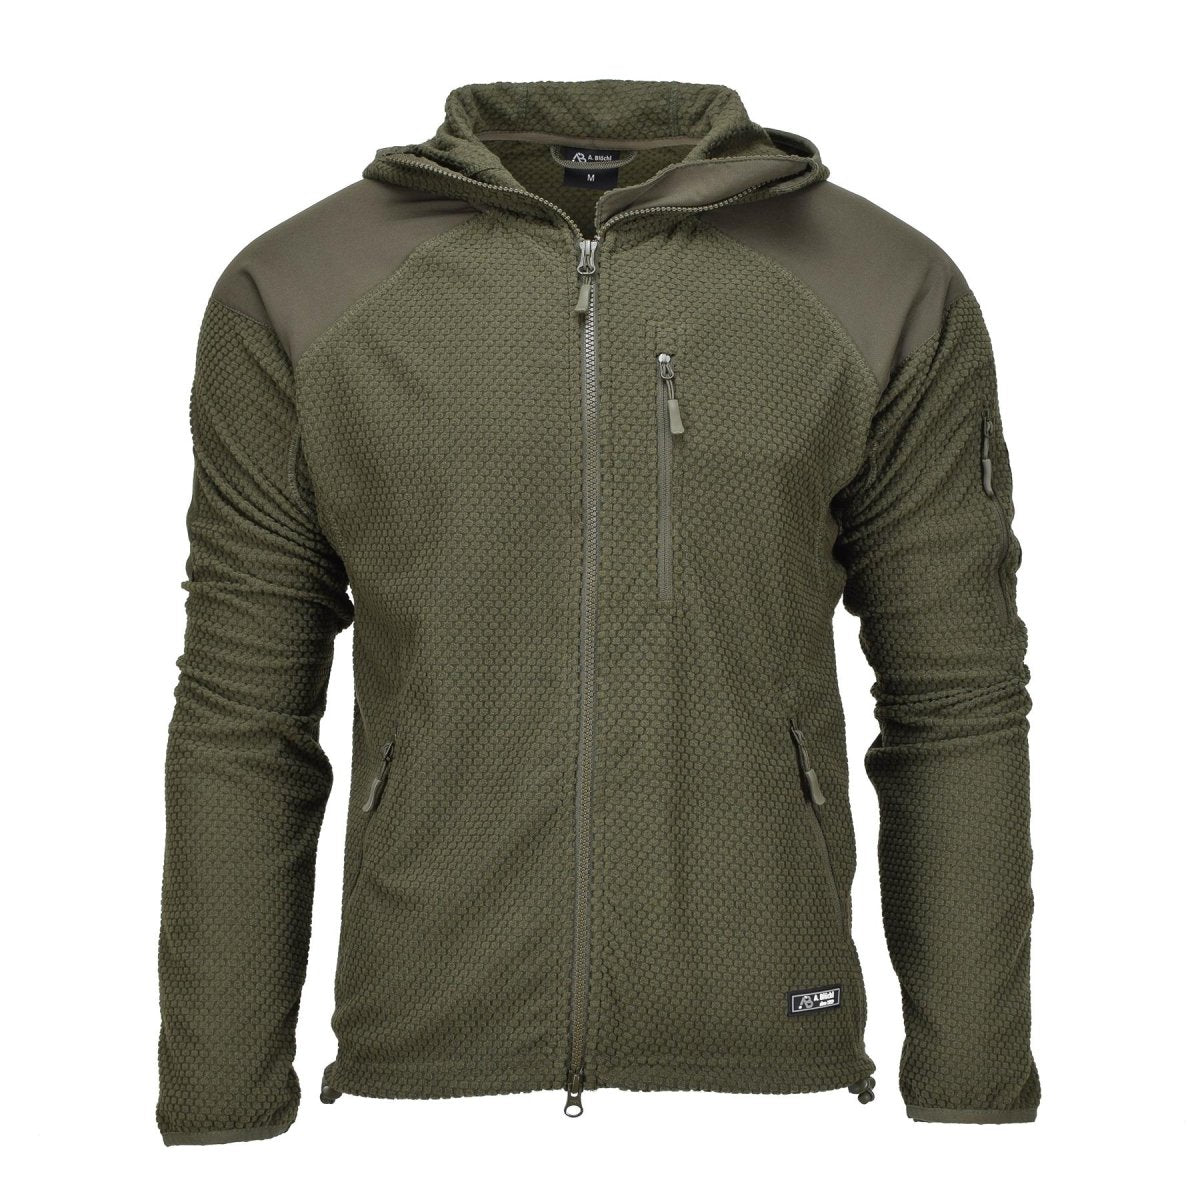 Military style cold weather fleece jacket hooded A.Blochl - GoMilitar